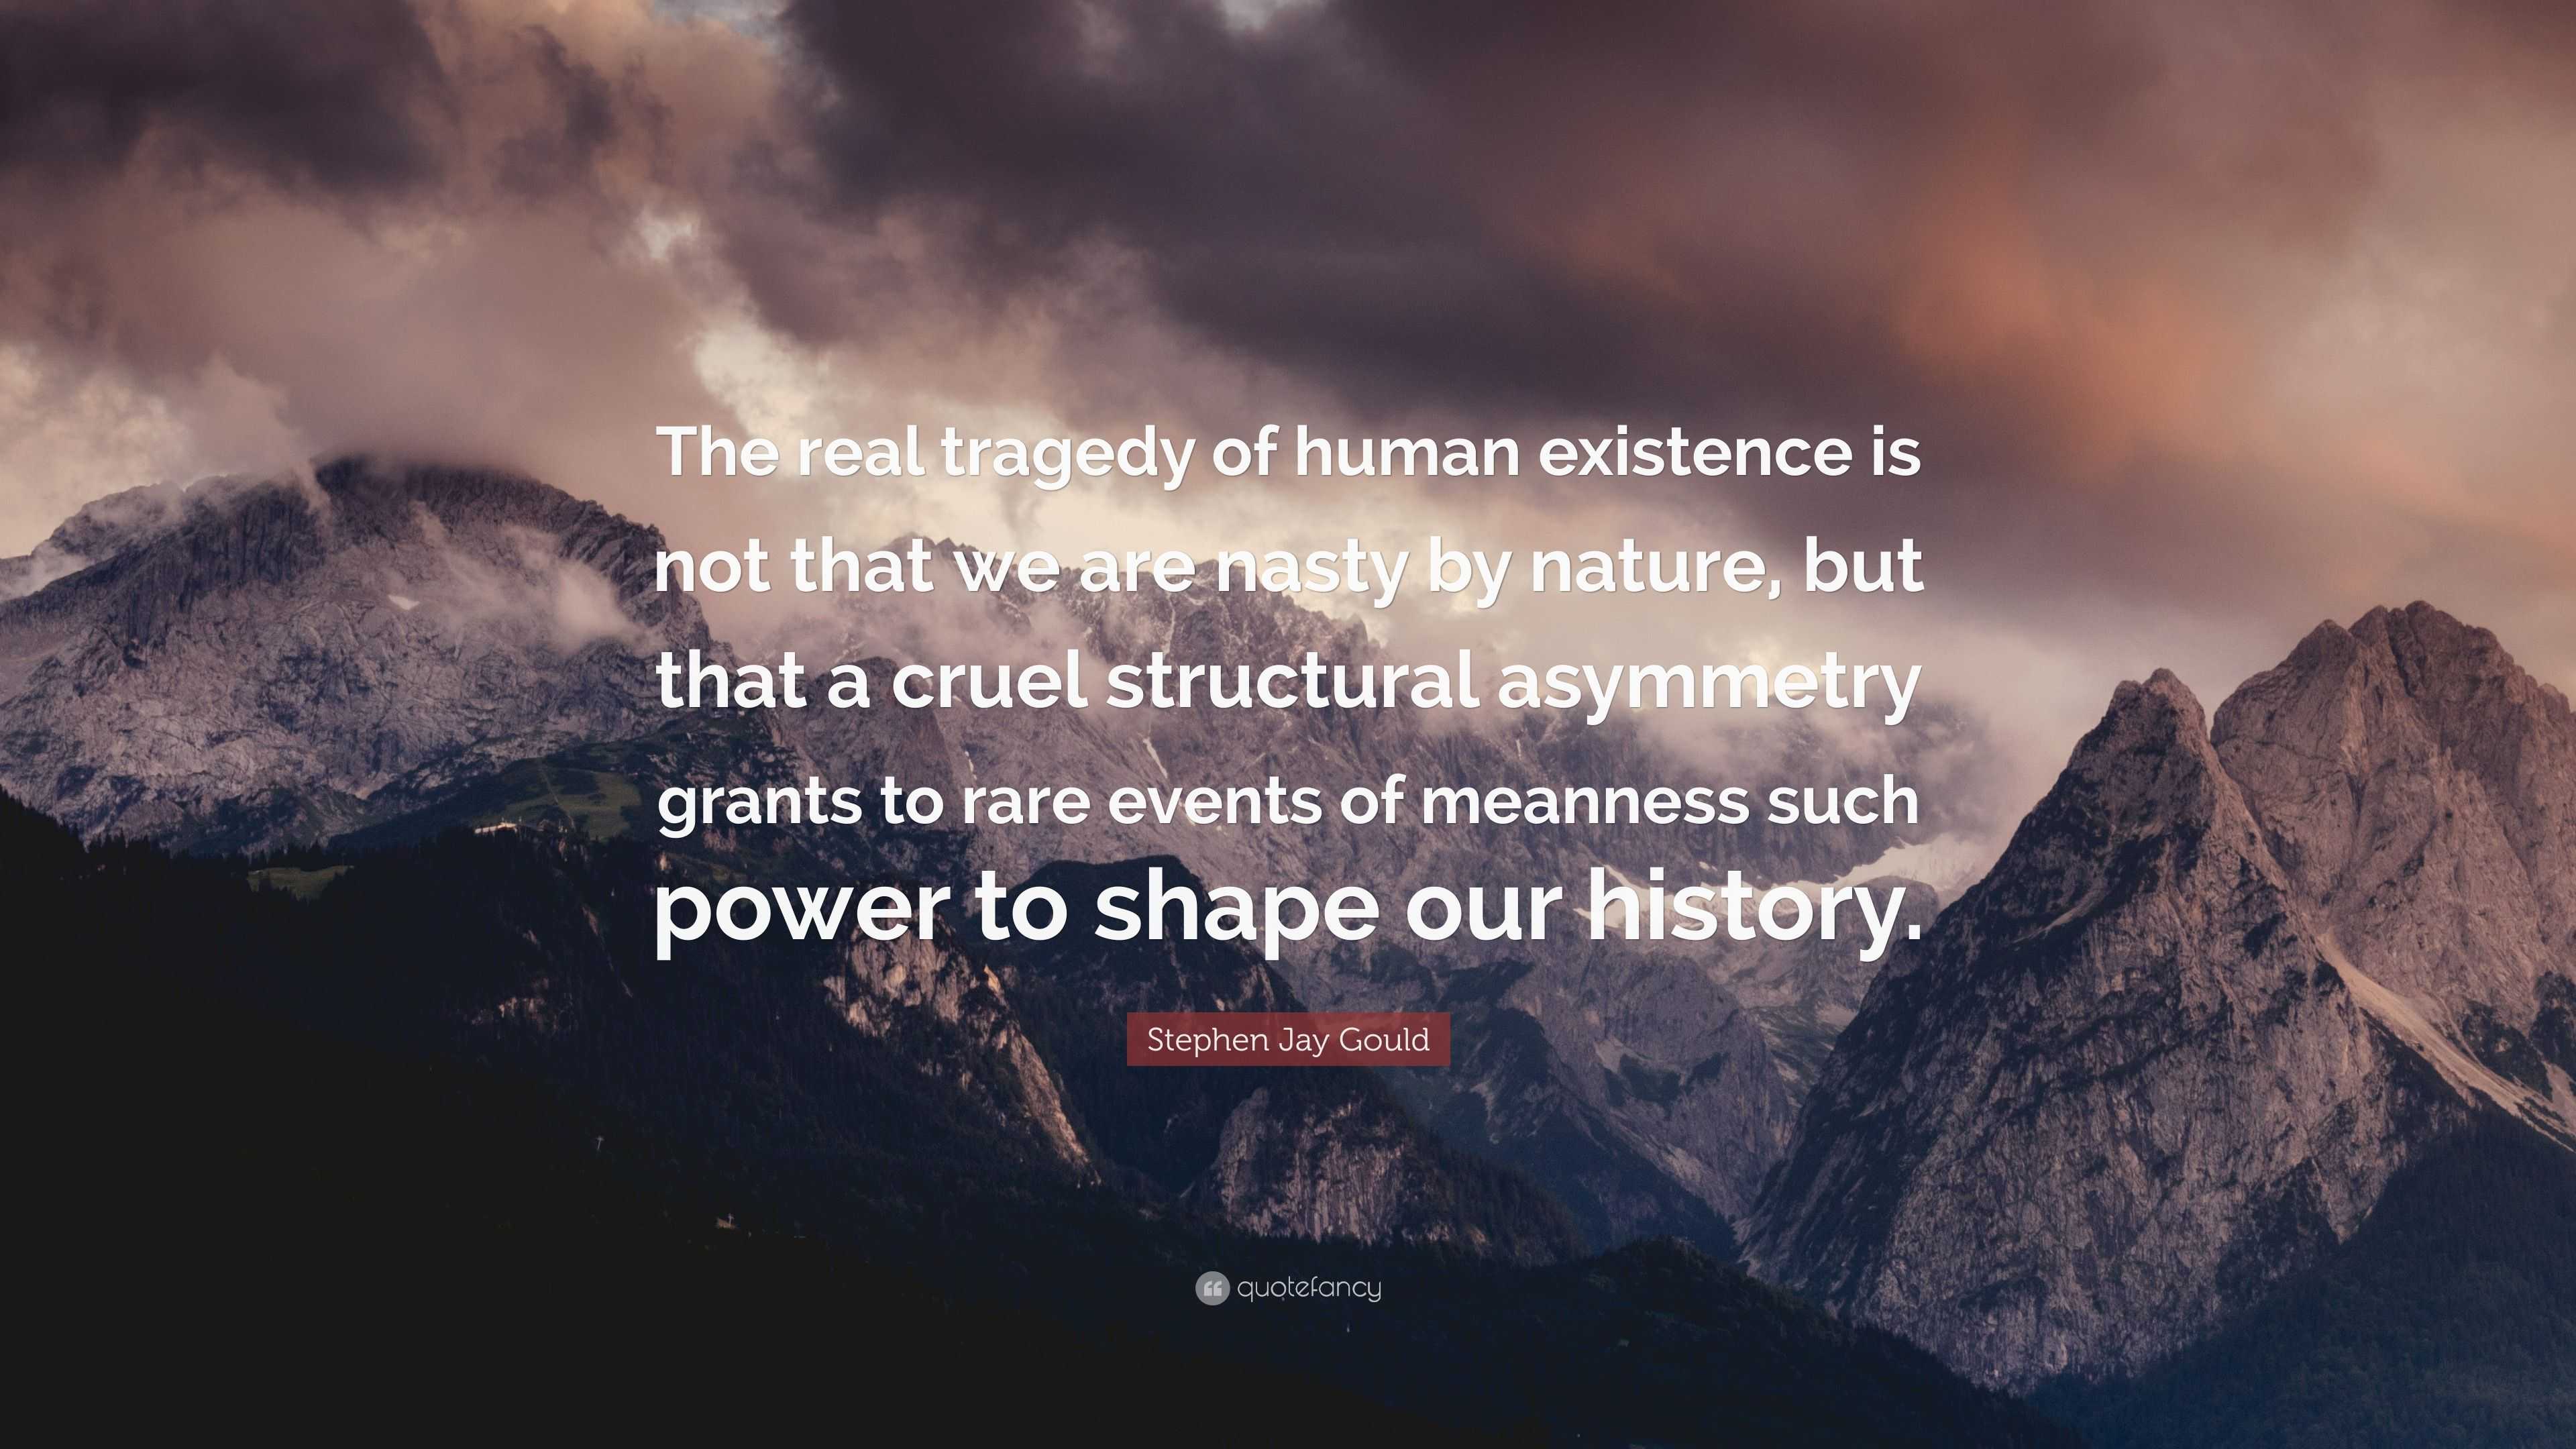 Stephen Jay Gould Quote: “The real tragedy of human existence is not that  we are nasty by nature